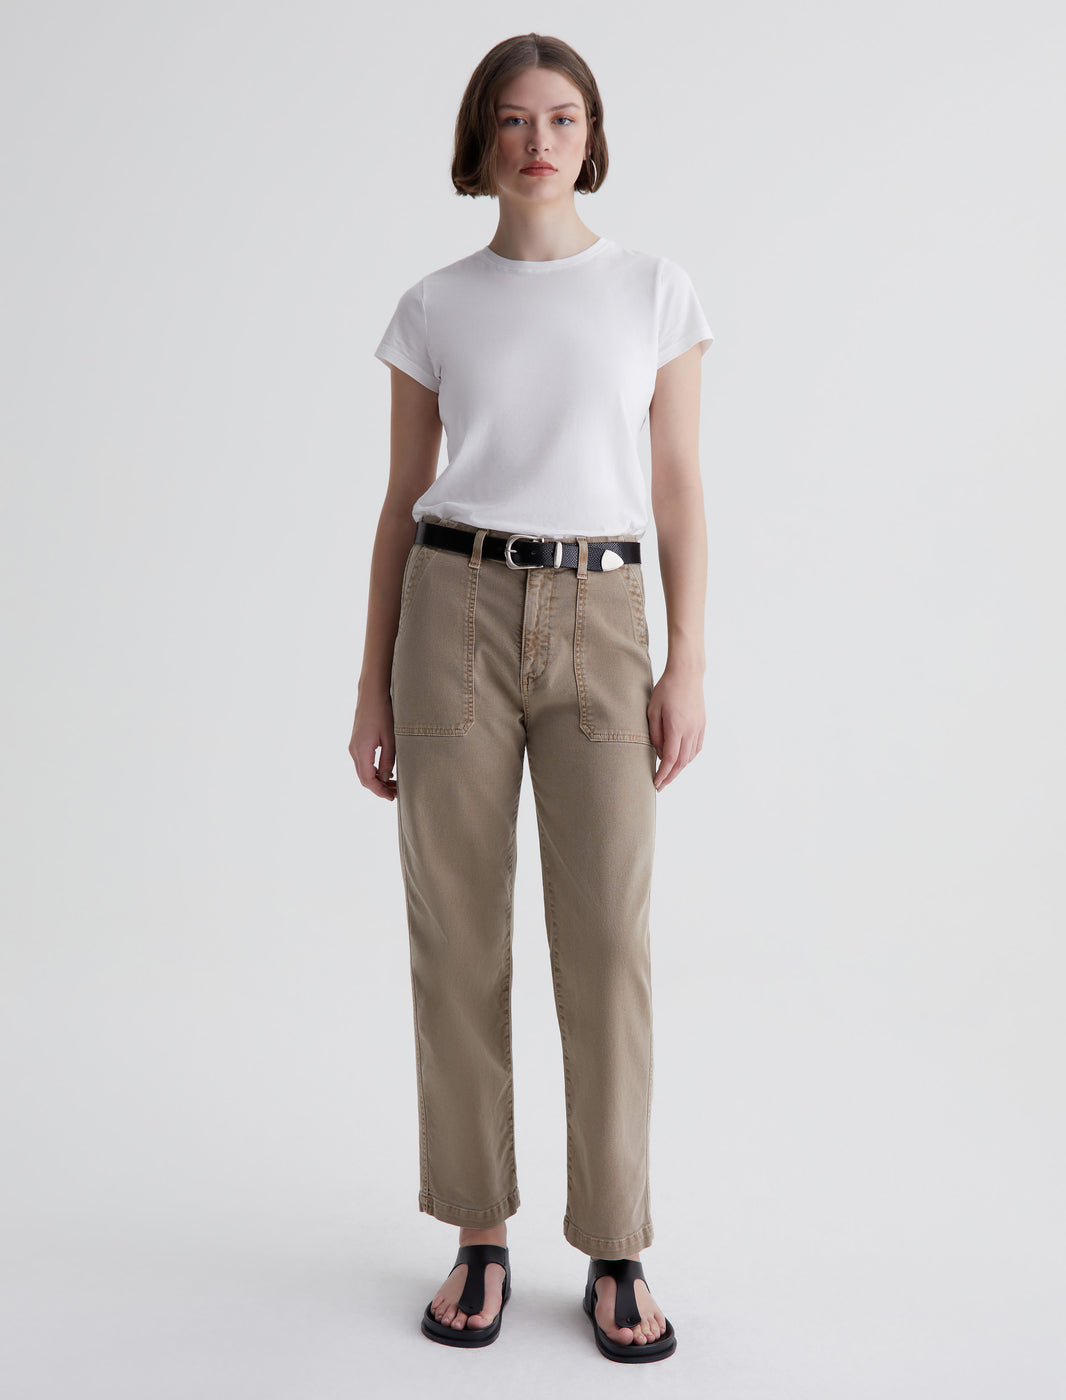 Women Jules Stone Khaki at AG Jeans Official Store